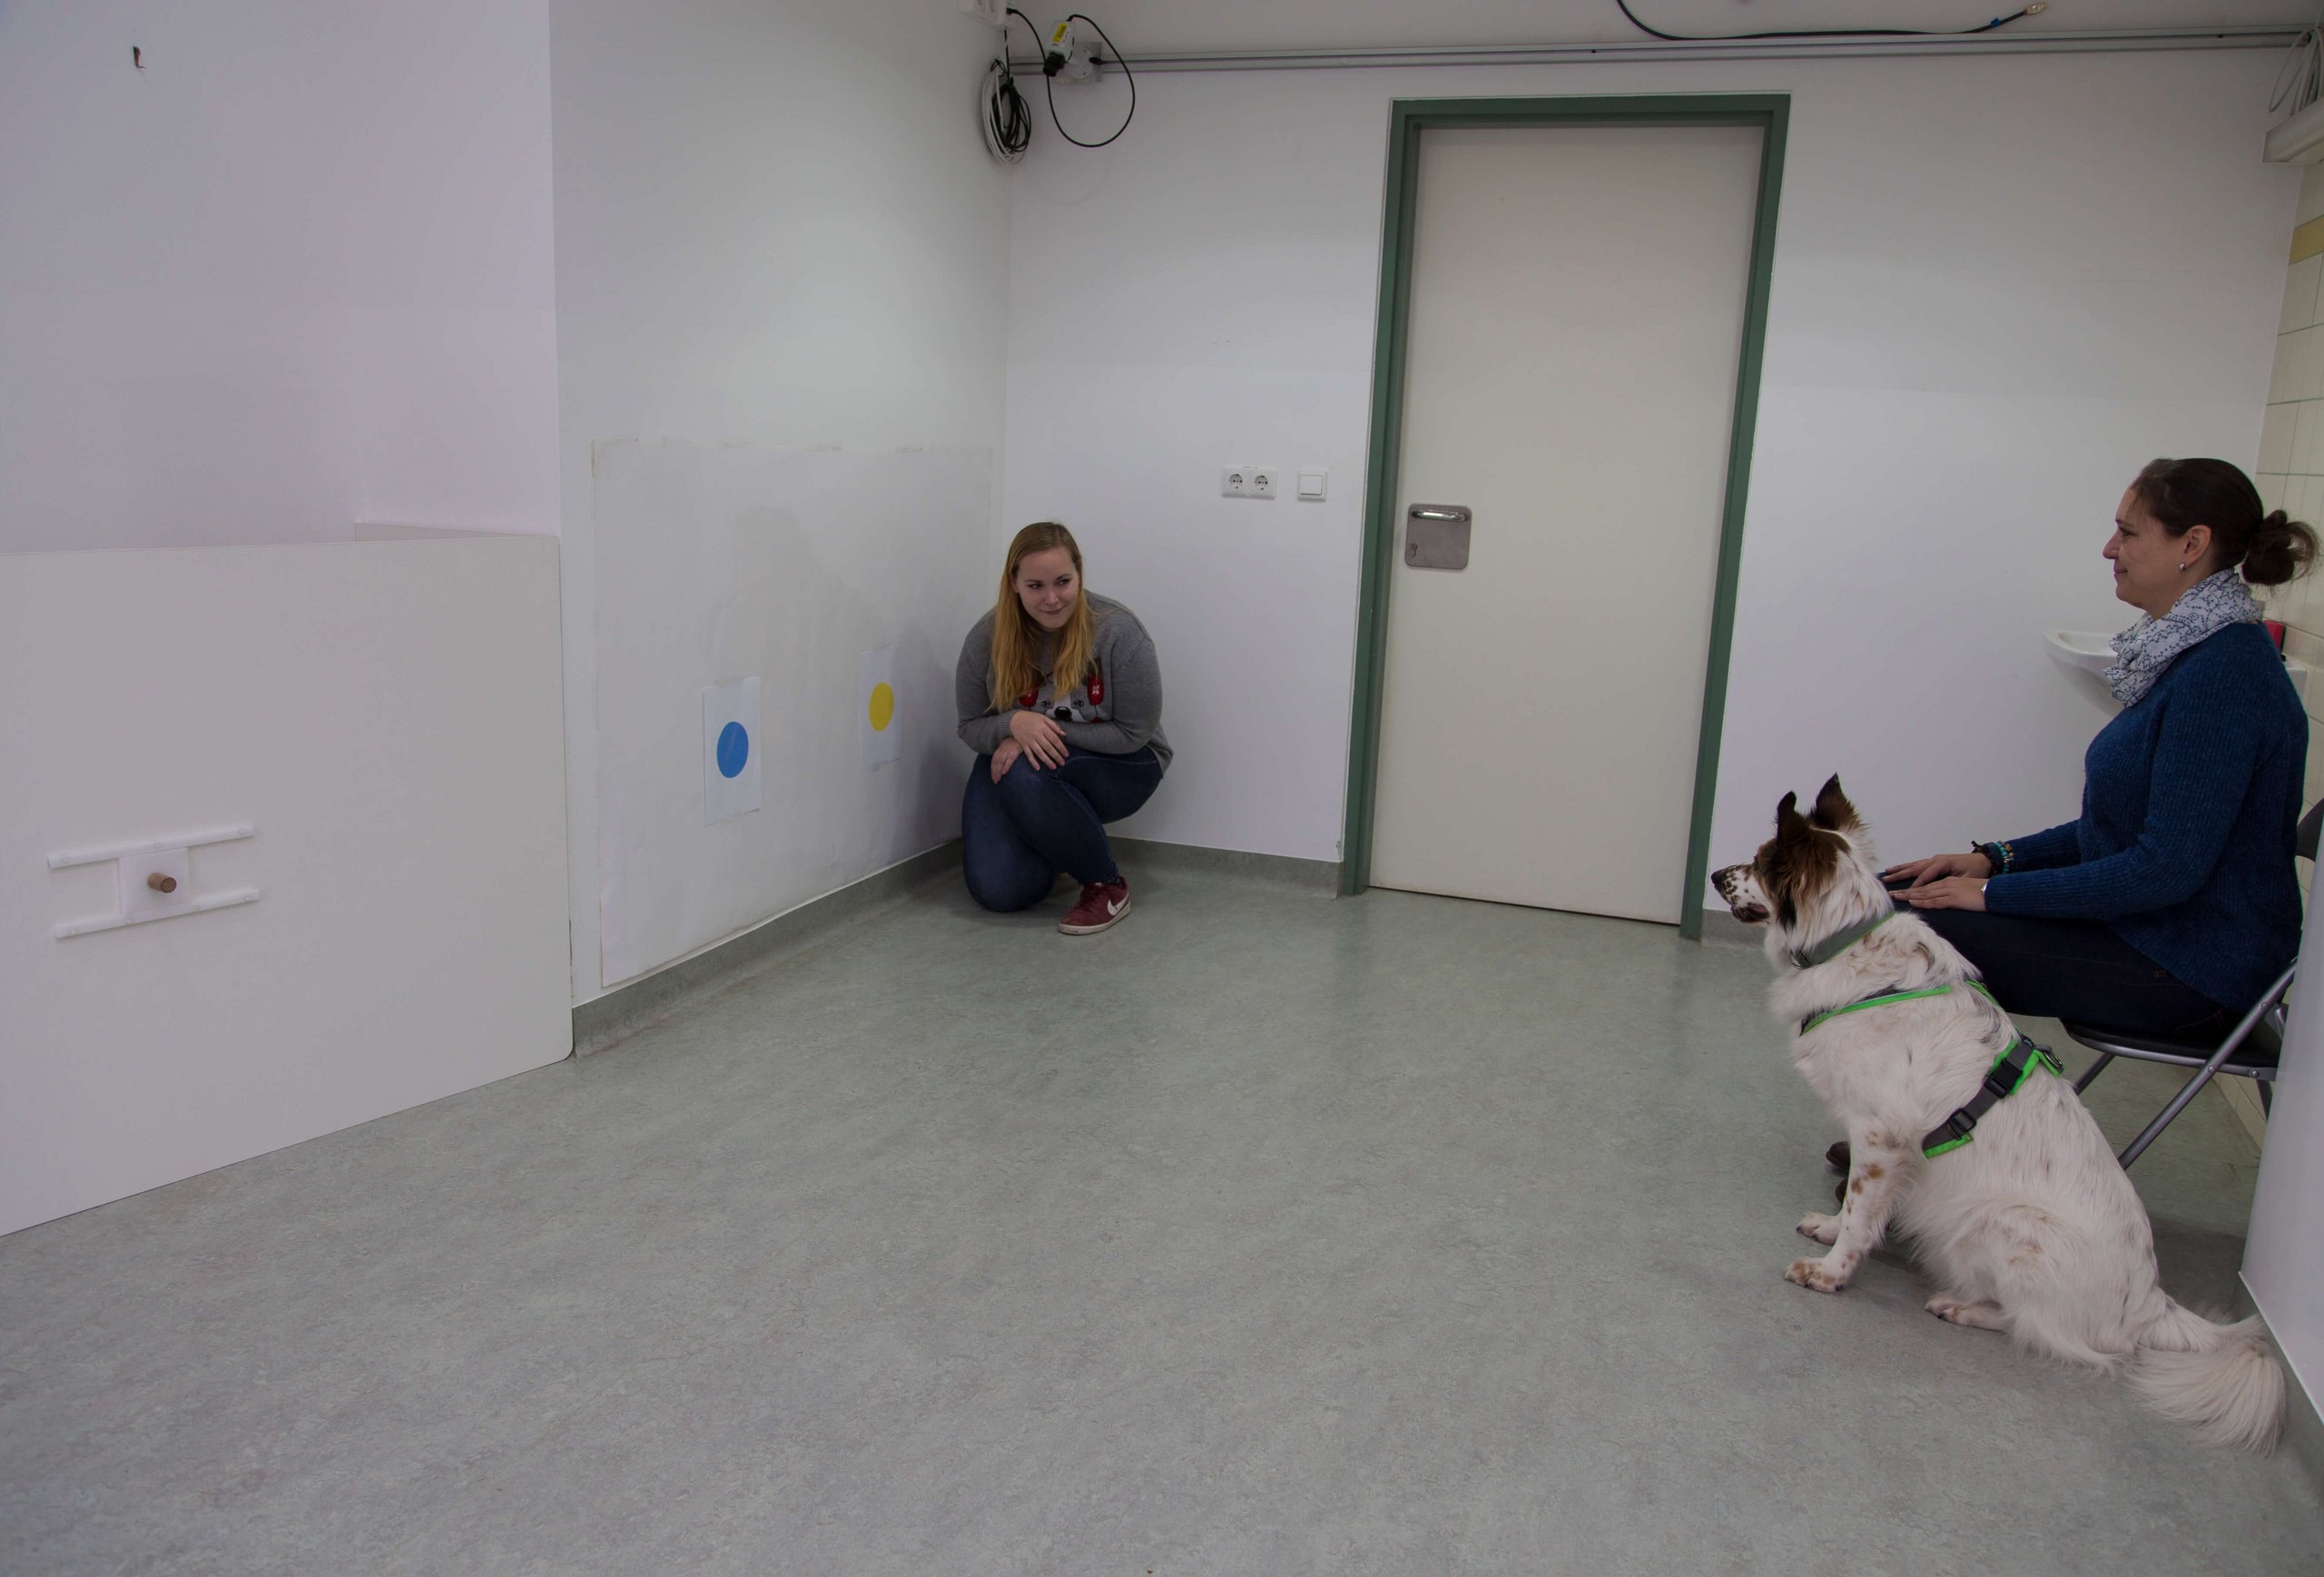 A dog sits next to the dog owner in a test room and observes the experimenter, who squats in a corner of the room in front of a wall with two dots on the floor.